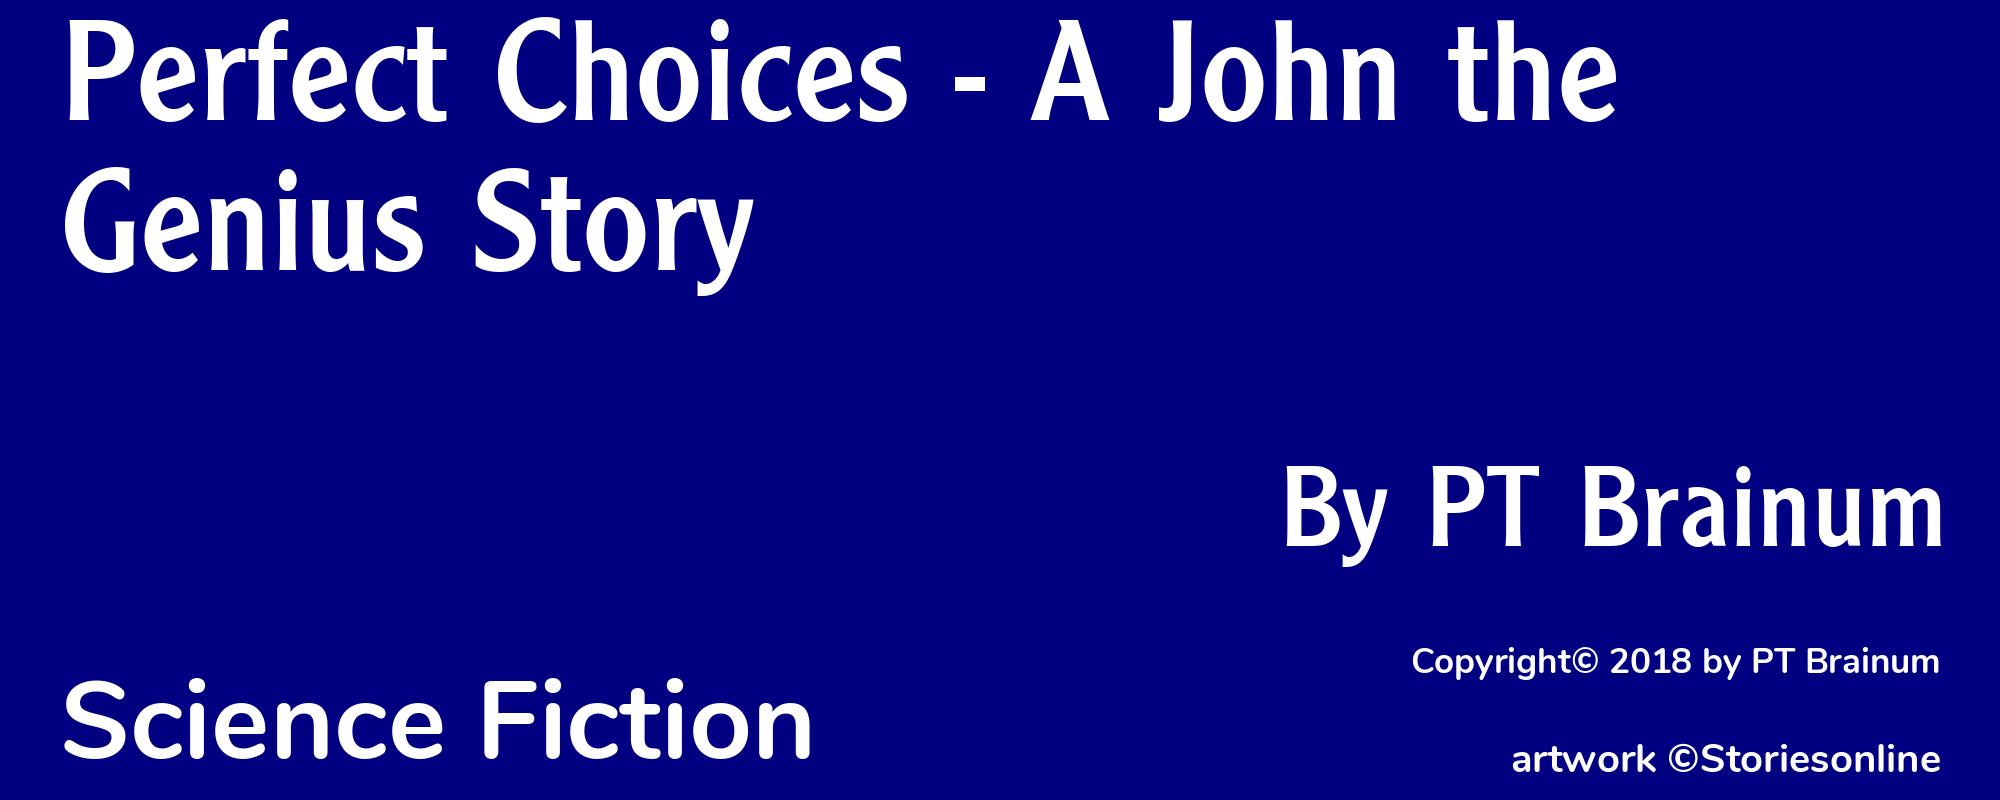 Perfect Choices - A John the Genius Story - Cover